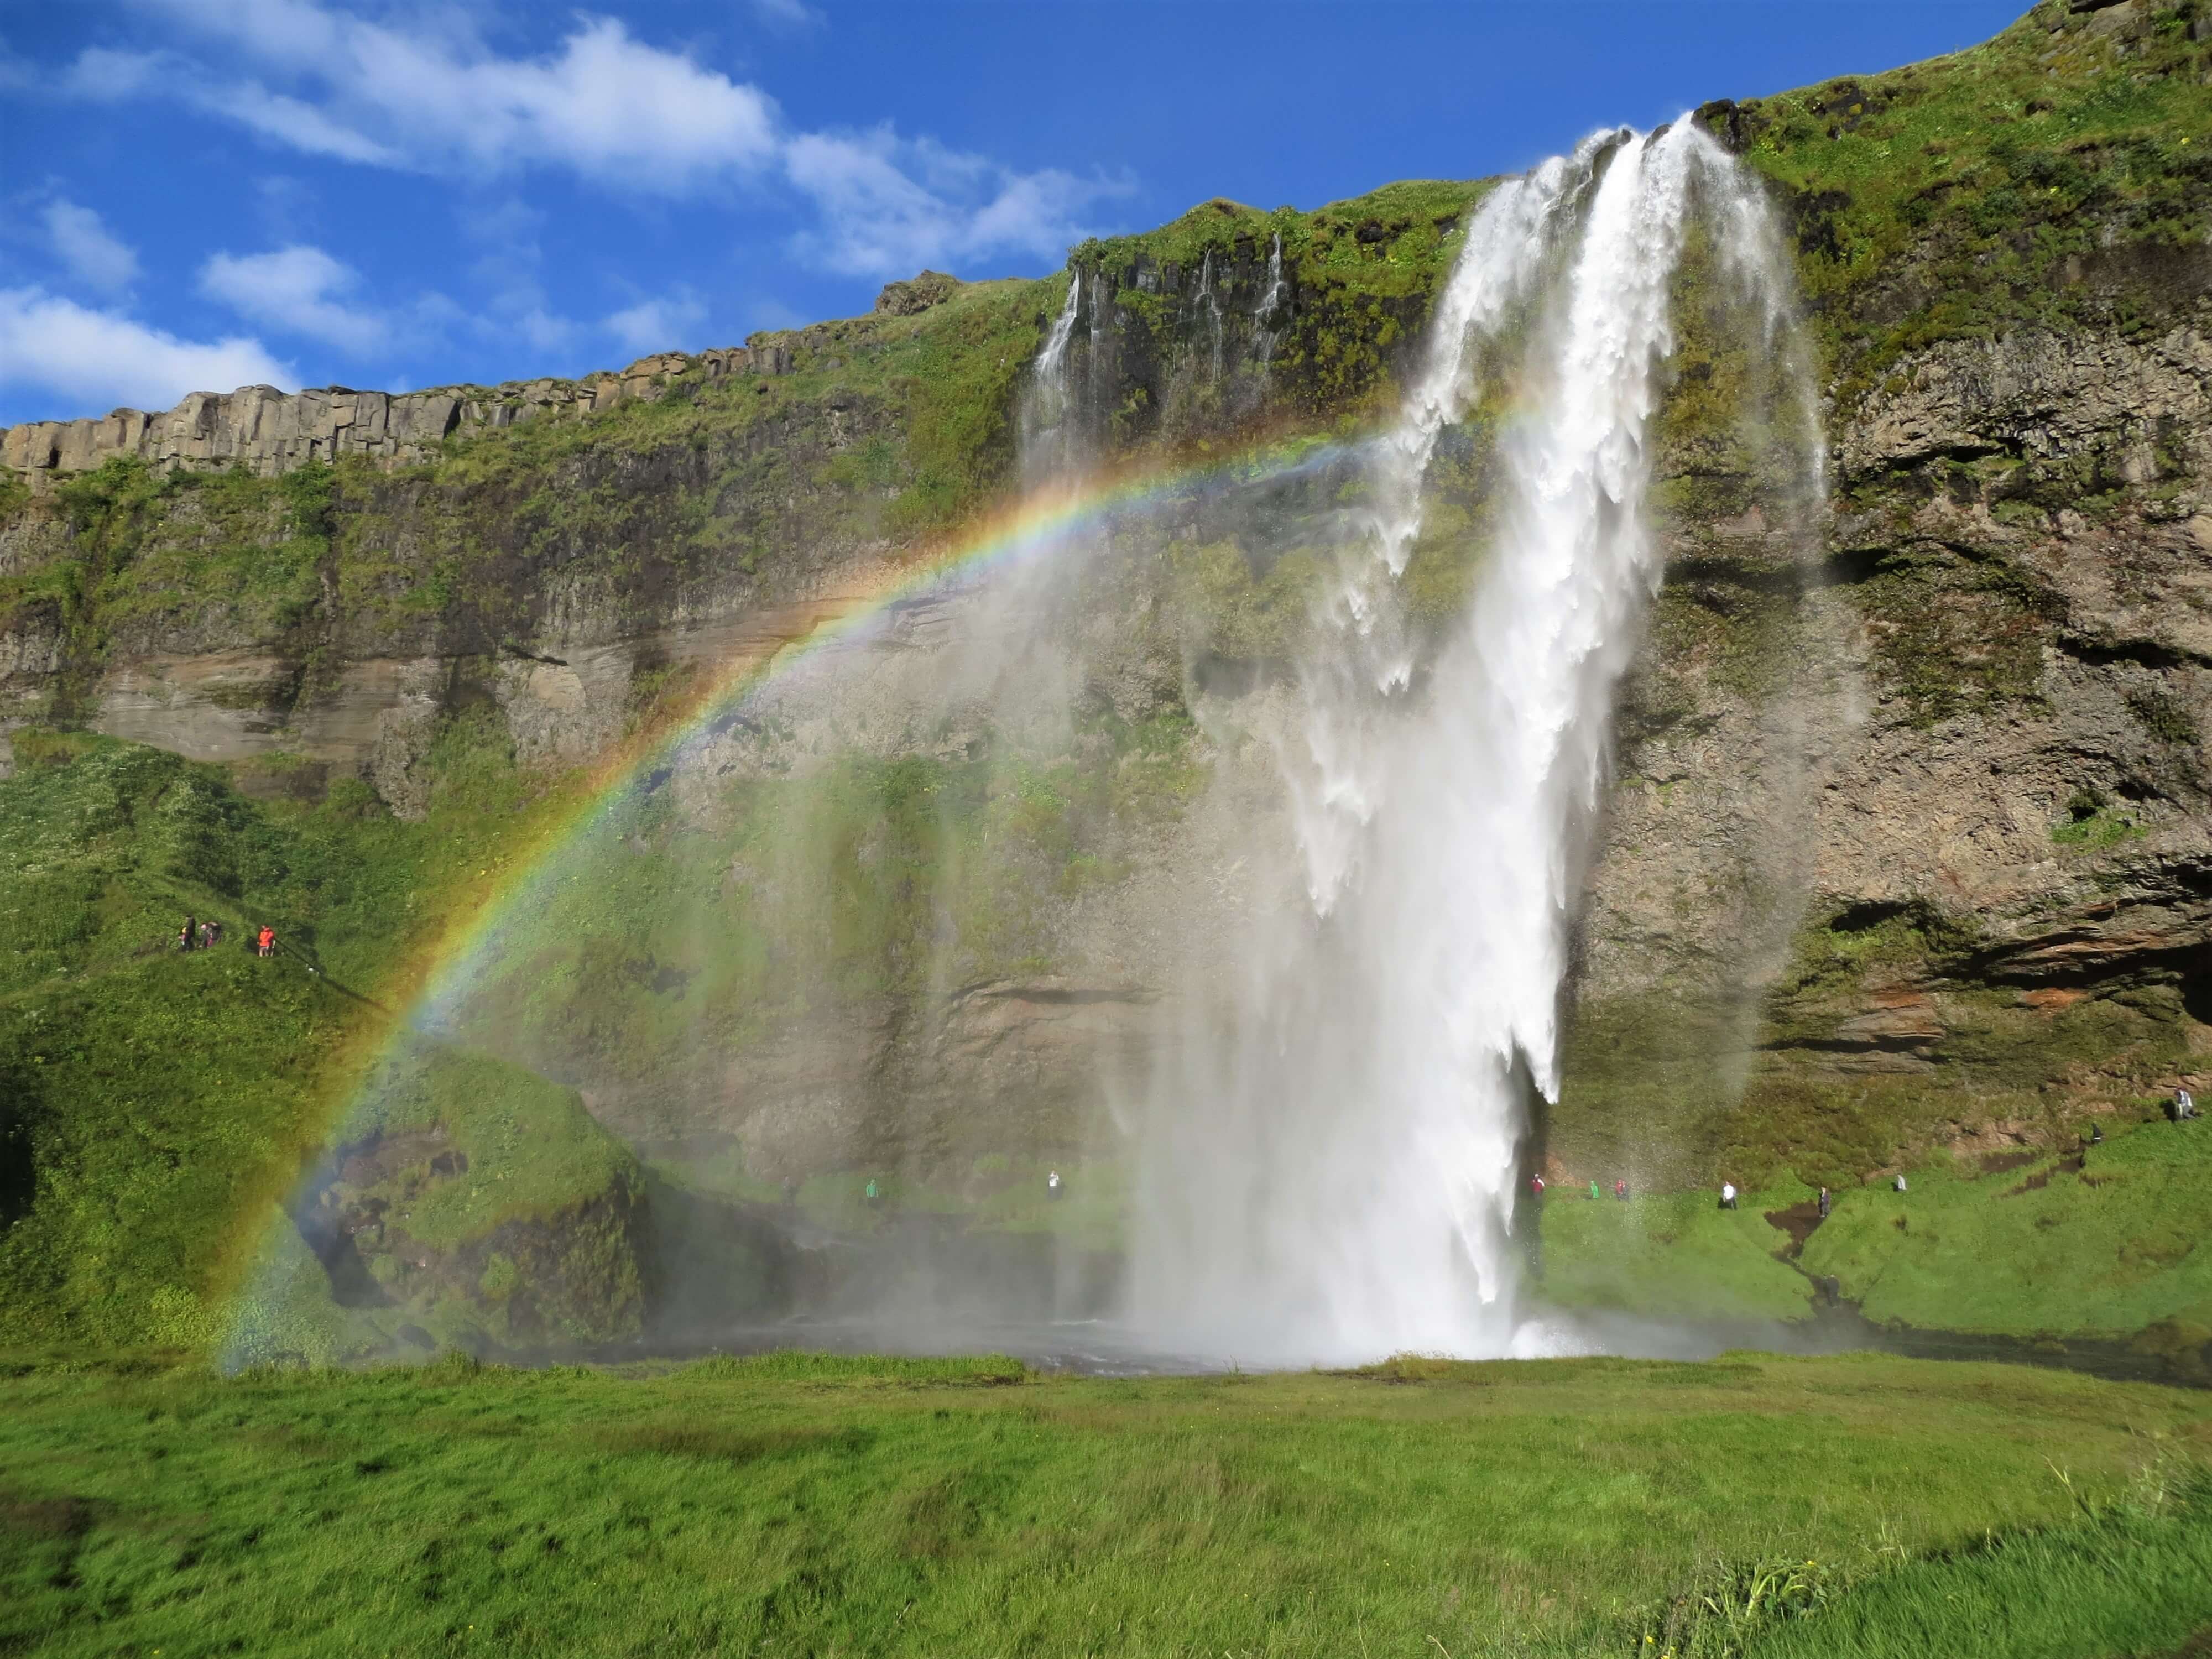 Waterfall Saljalandsfoss in the South of Iceland.